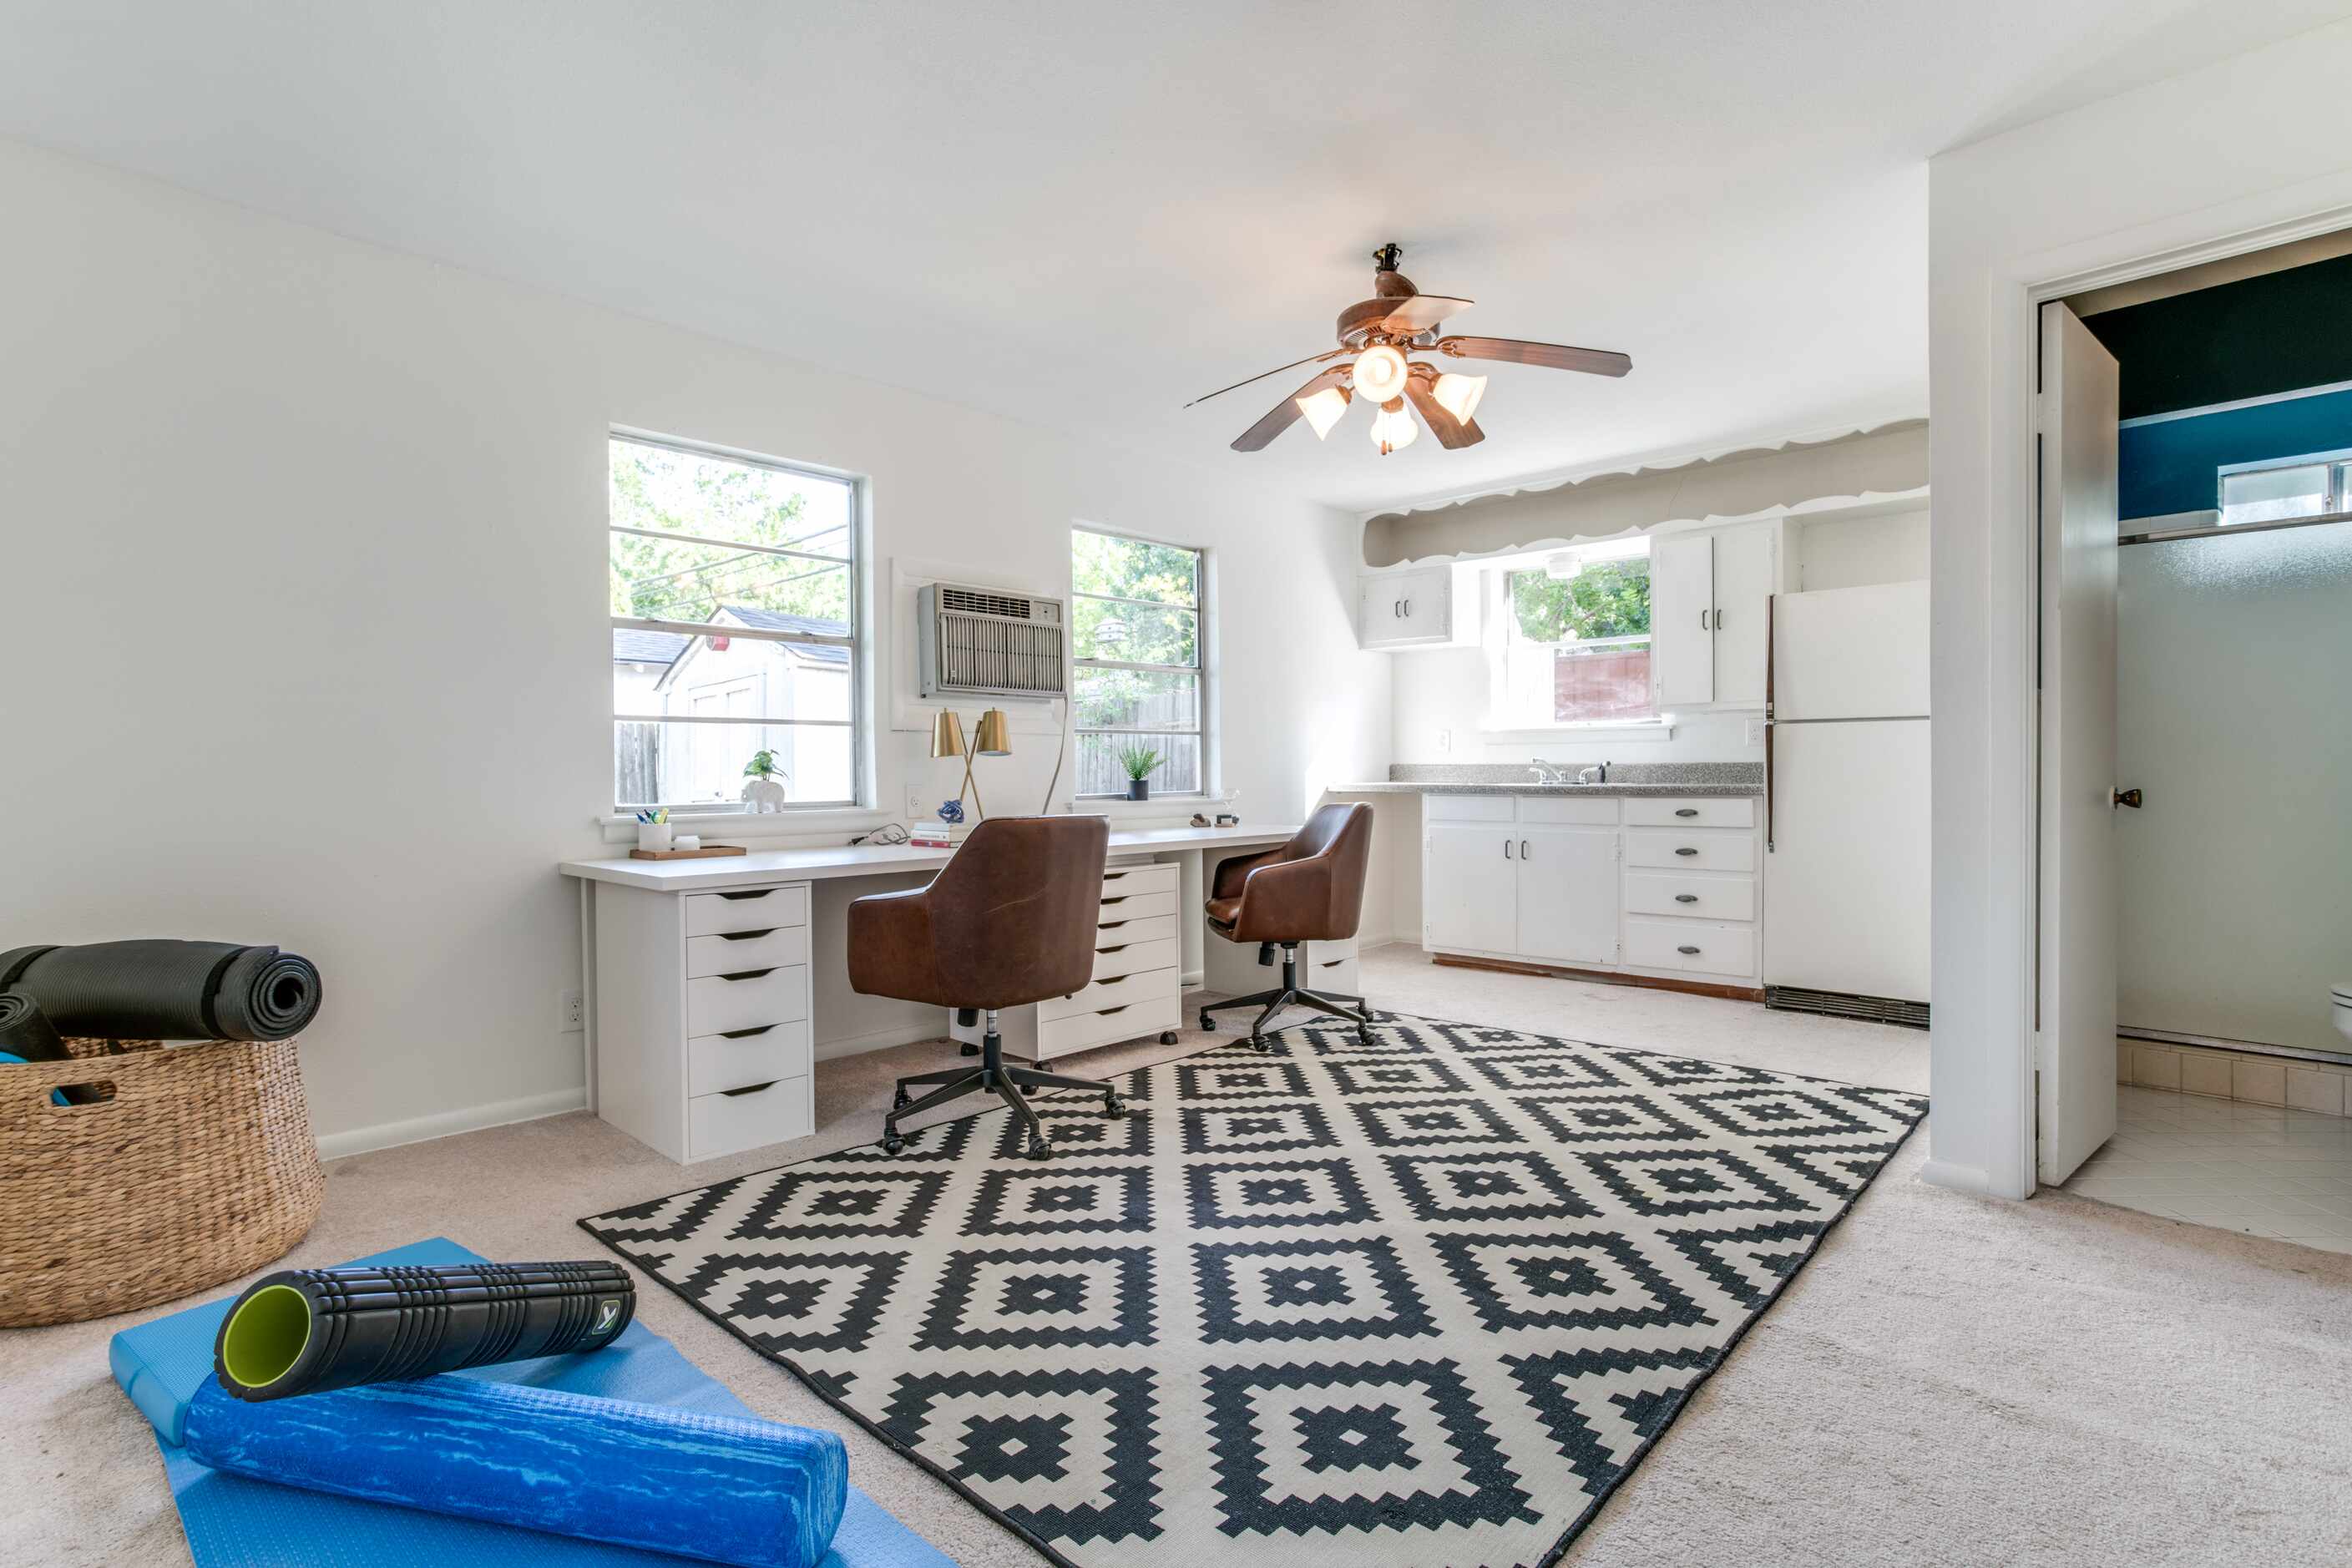 A renovated 1950s home in Old Lake Highlands at 603 Classen Drive has an accessory dwelling...